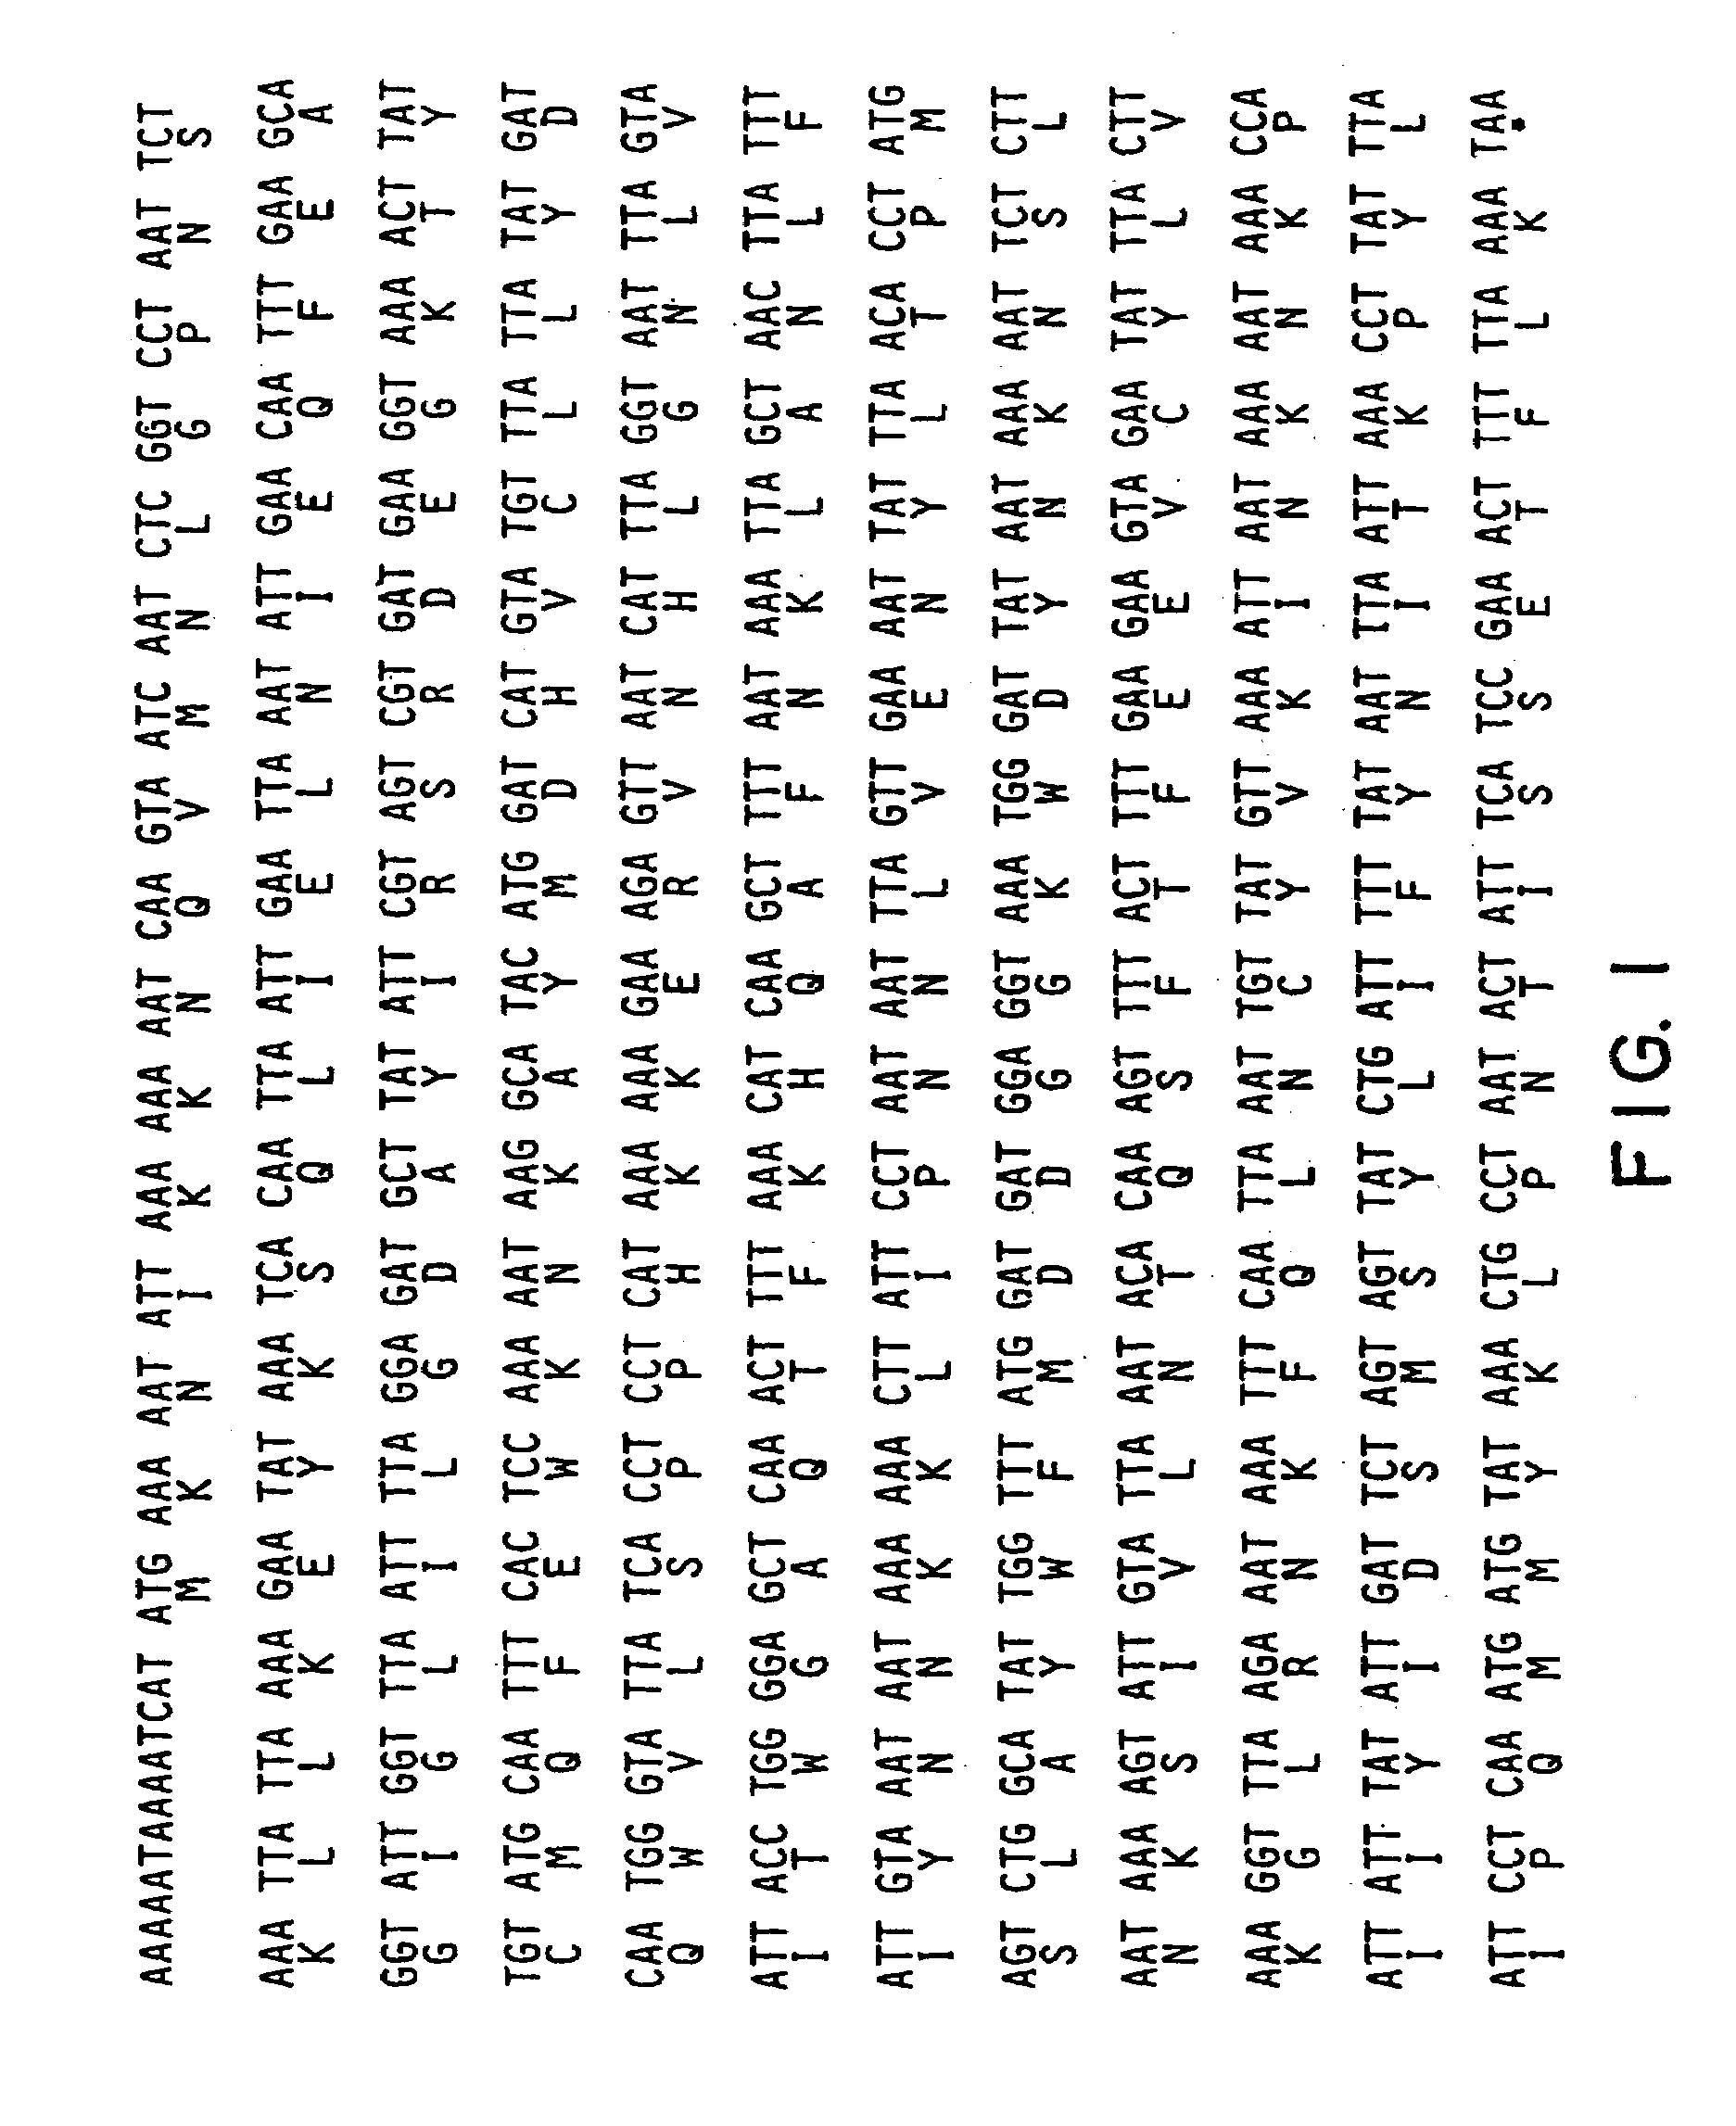 Nucleotide sequence encoding the enzyme I-SceI and the uses thereof